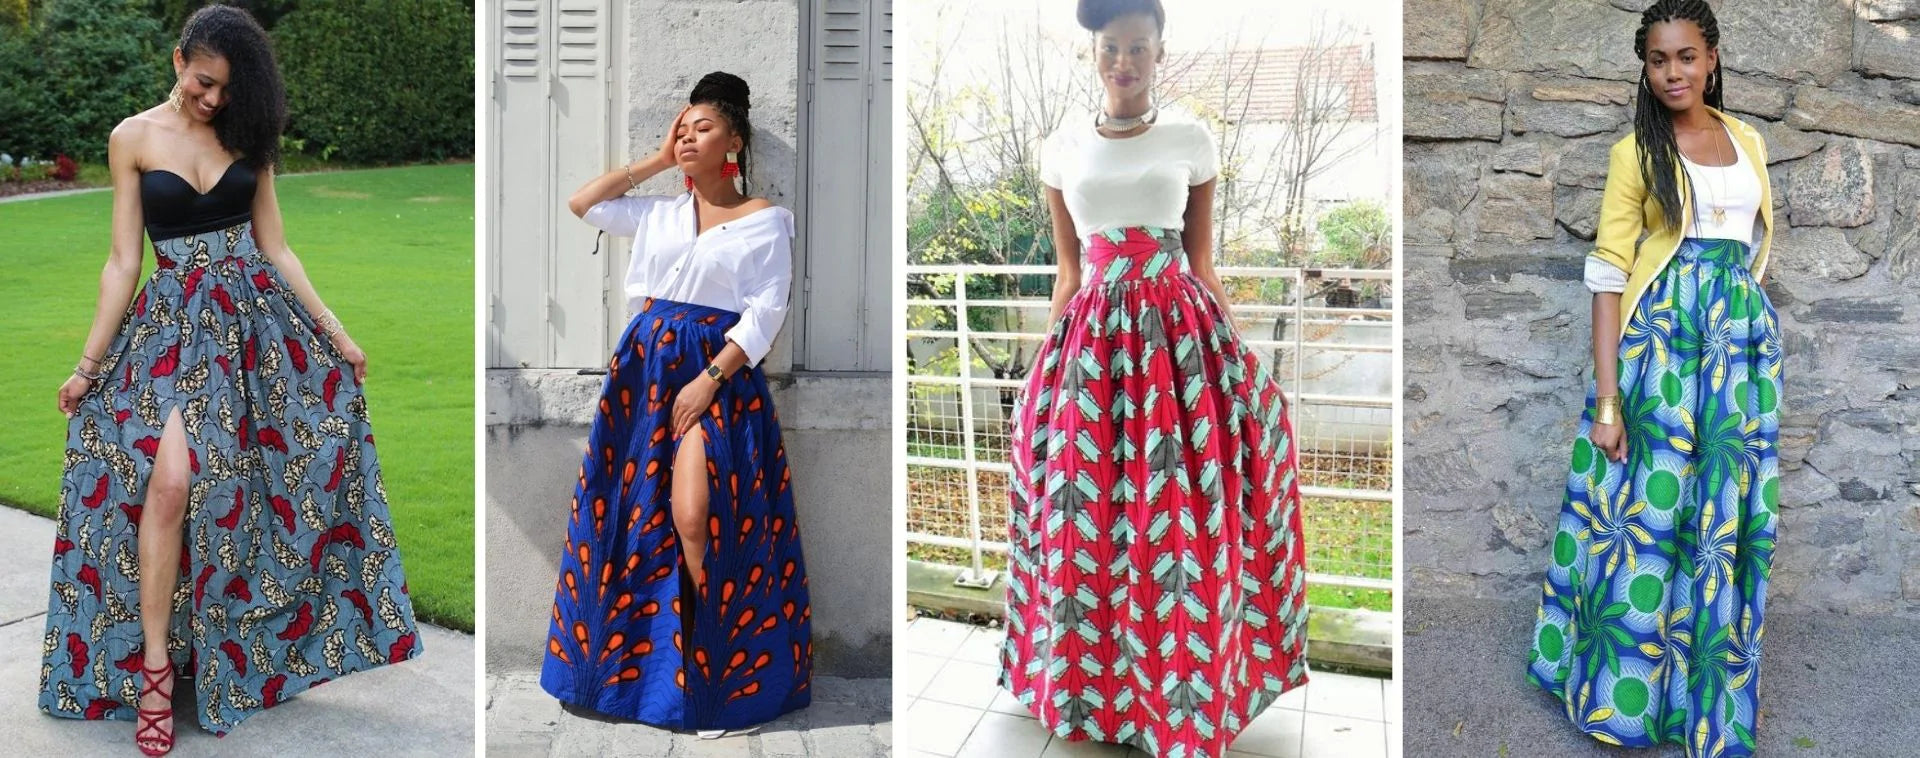 How to wear high-waisted long skirts